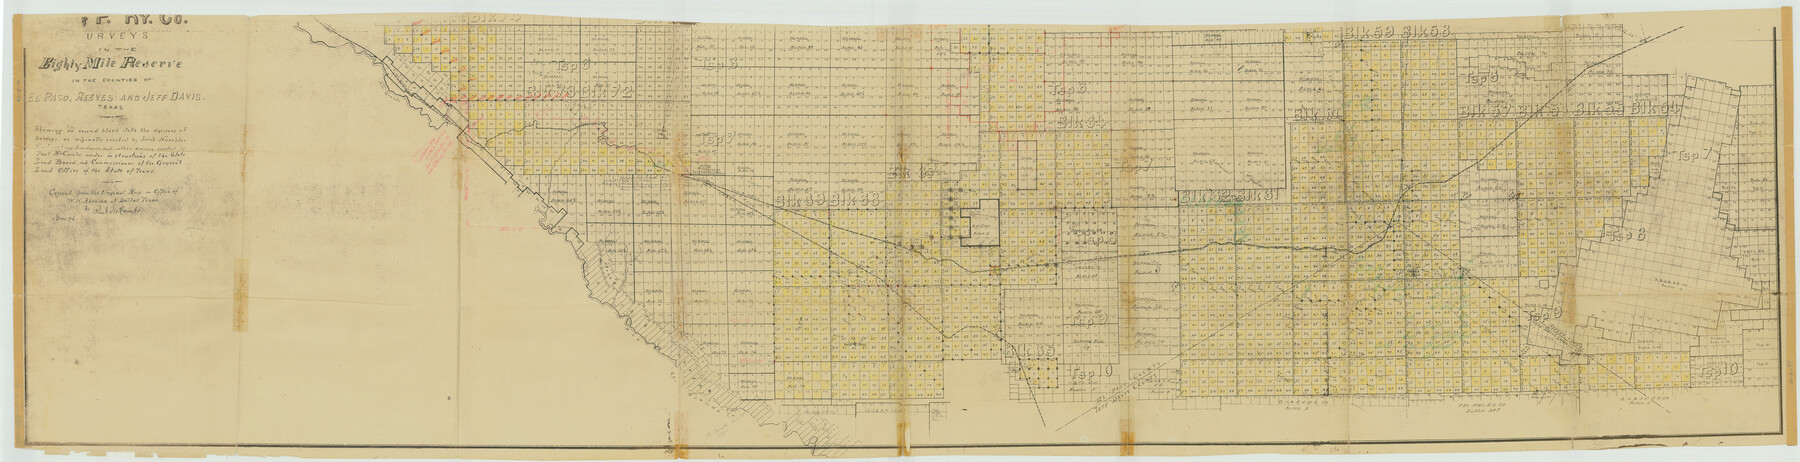 69766, [Index map of T. & P. Ry. Company’s 80-mile Trans-Pecos Reserve’s perpetuated corners - South Part], General Map Collection